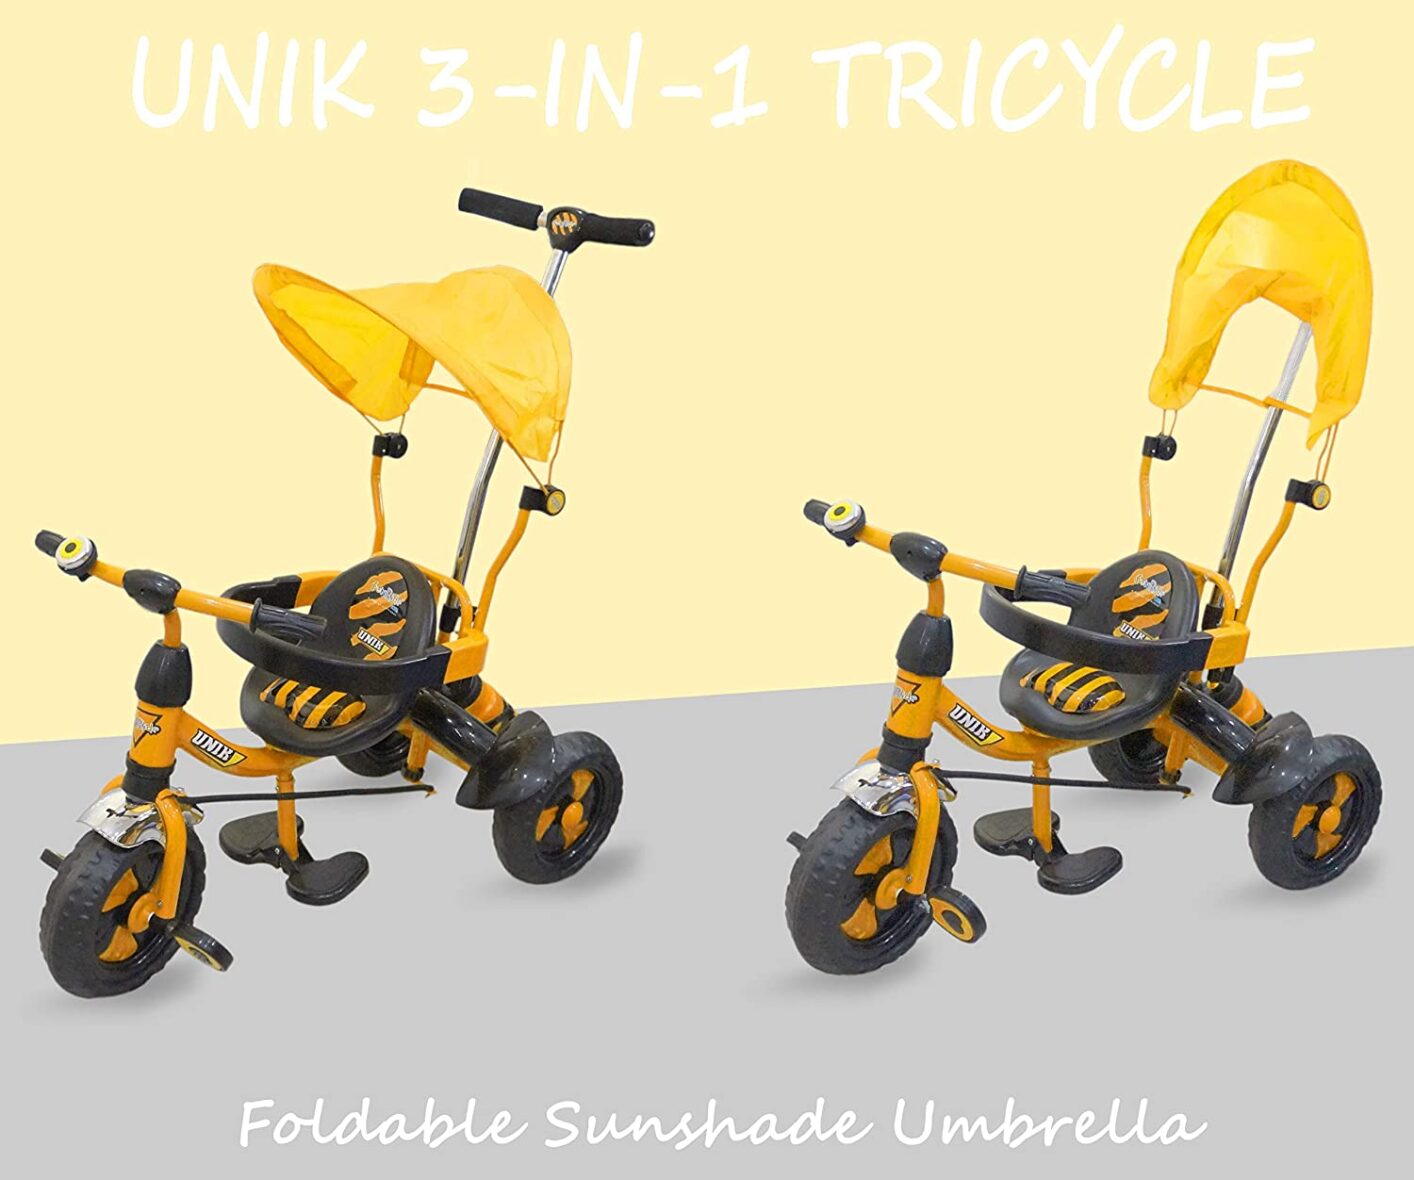 Fun Ride Baby Tricycle Unik Deluxe Rider 1 to 4 Years (20)